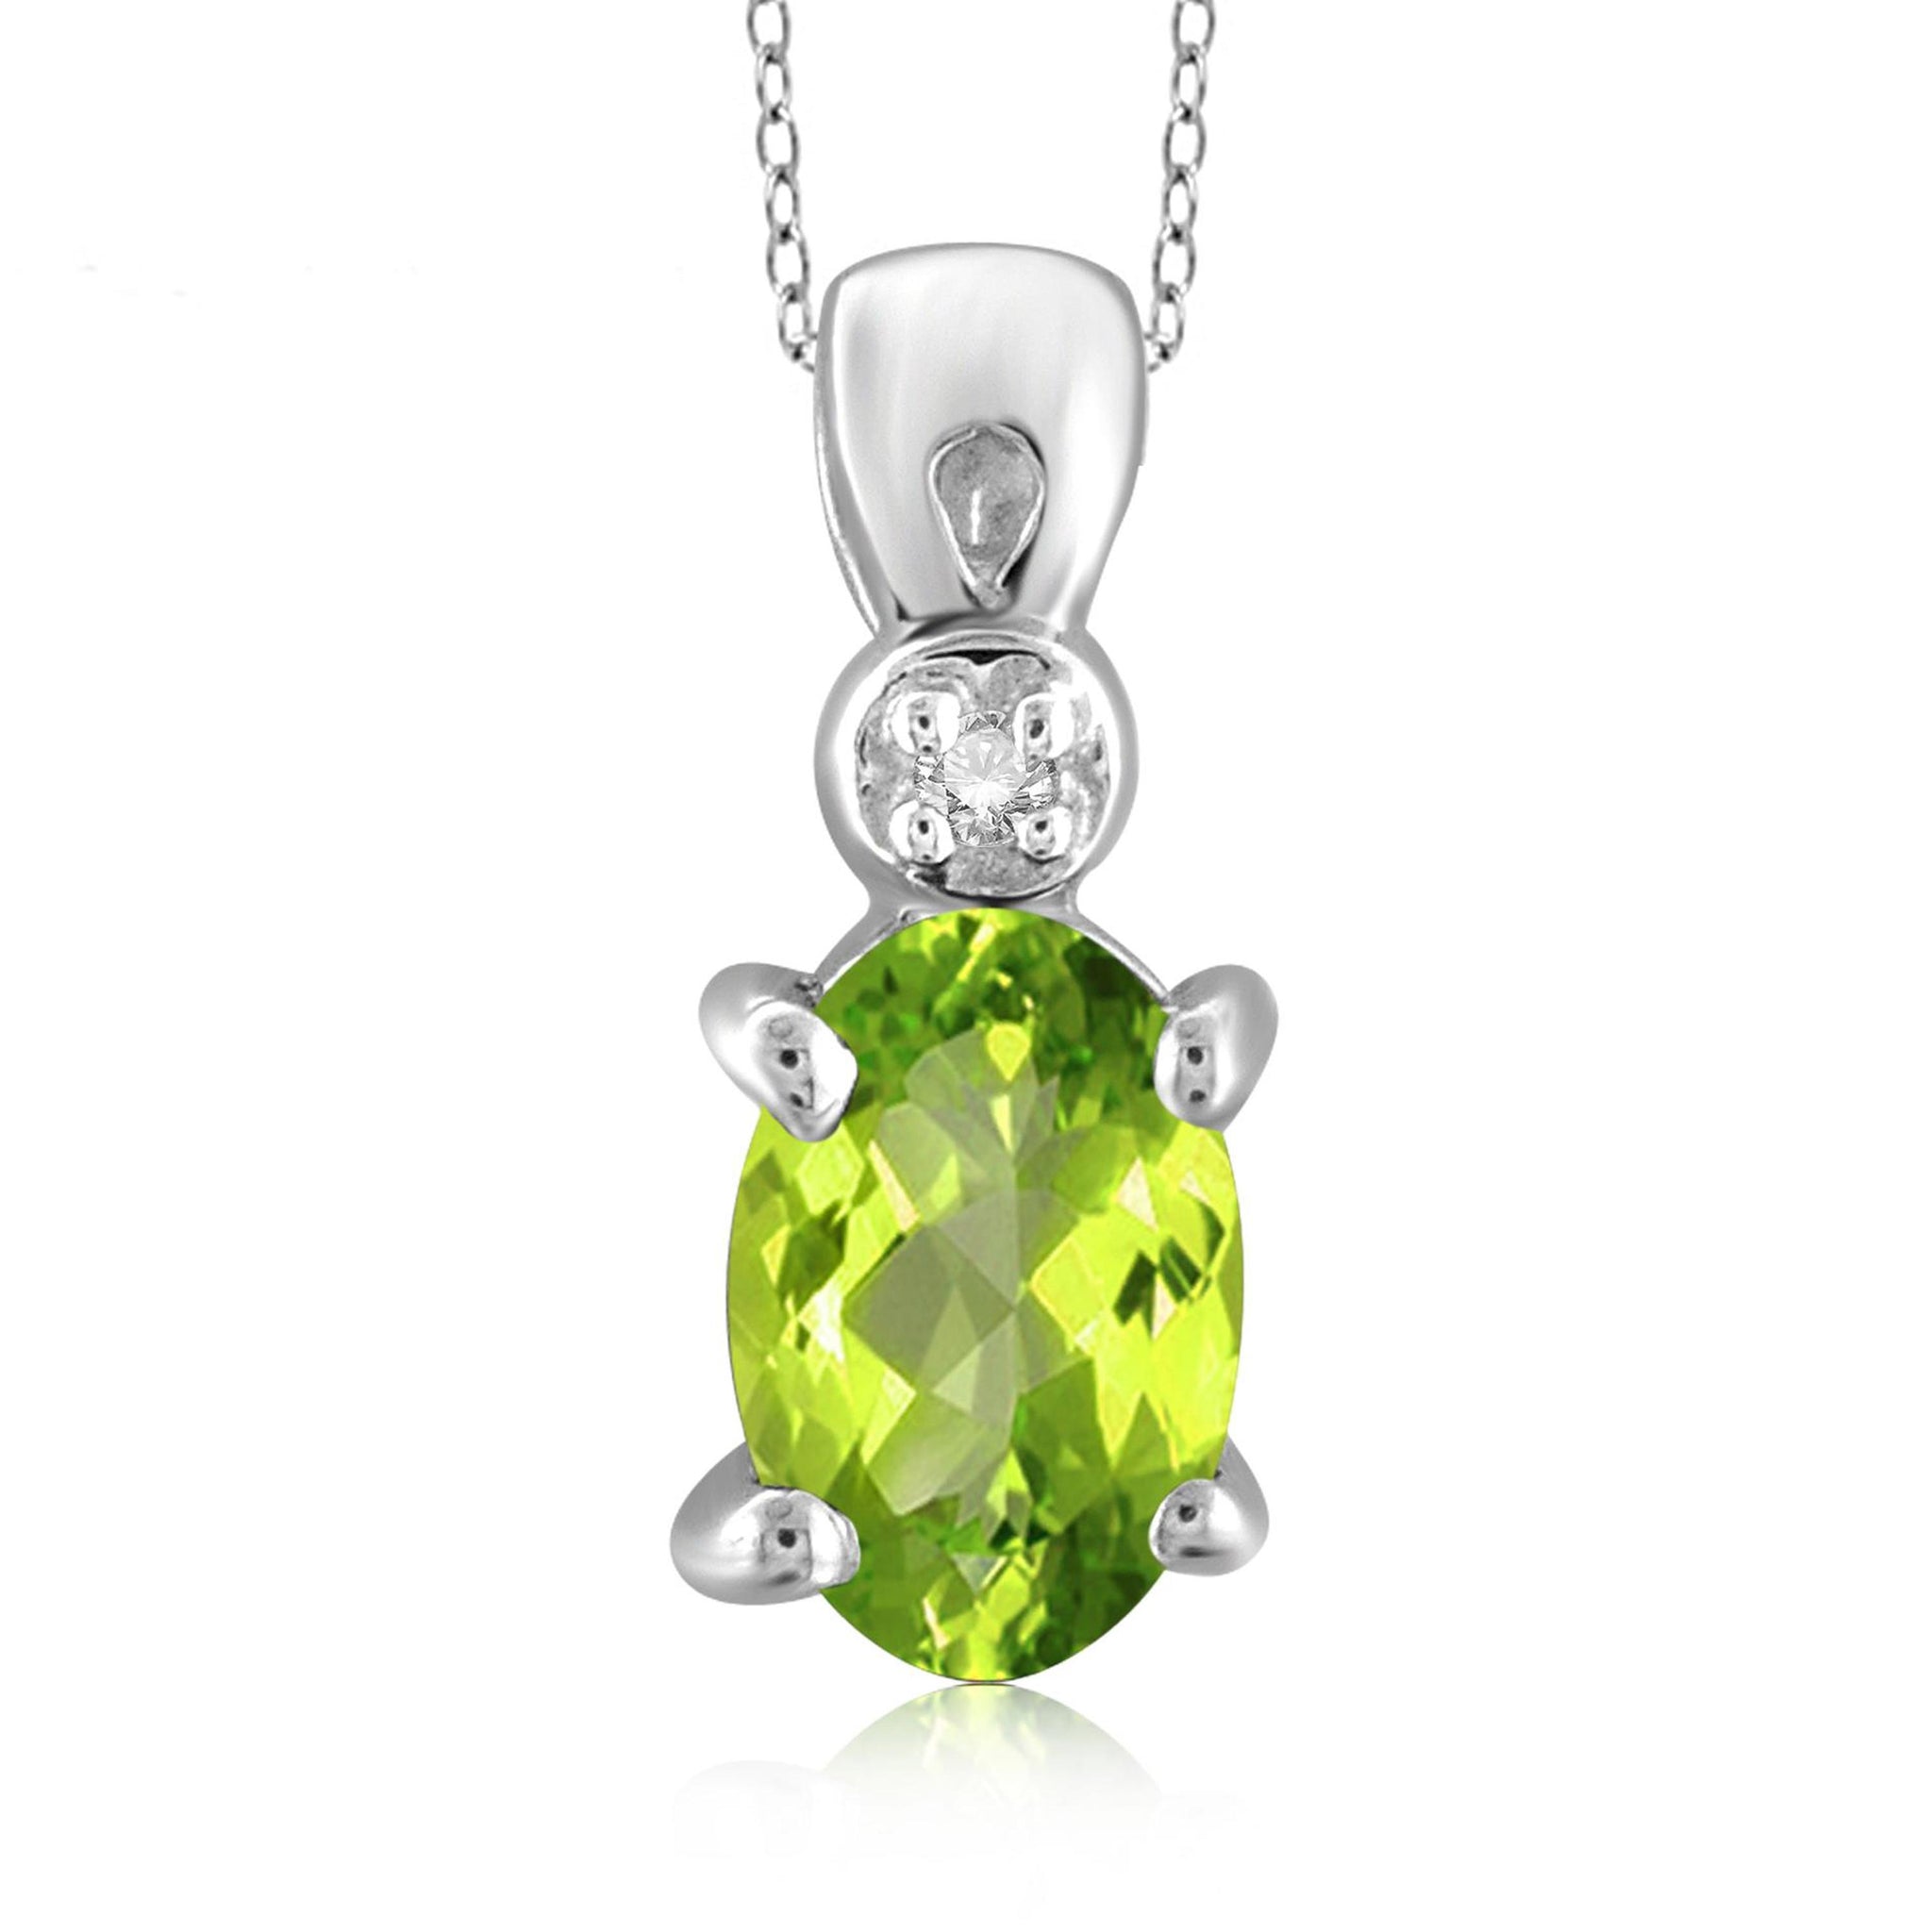 JewelonFire 1/2 Carat T.G.W. Peridot and White Diamond Accent Sterling Silver Pendant - Assorted Colors